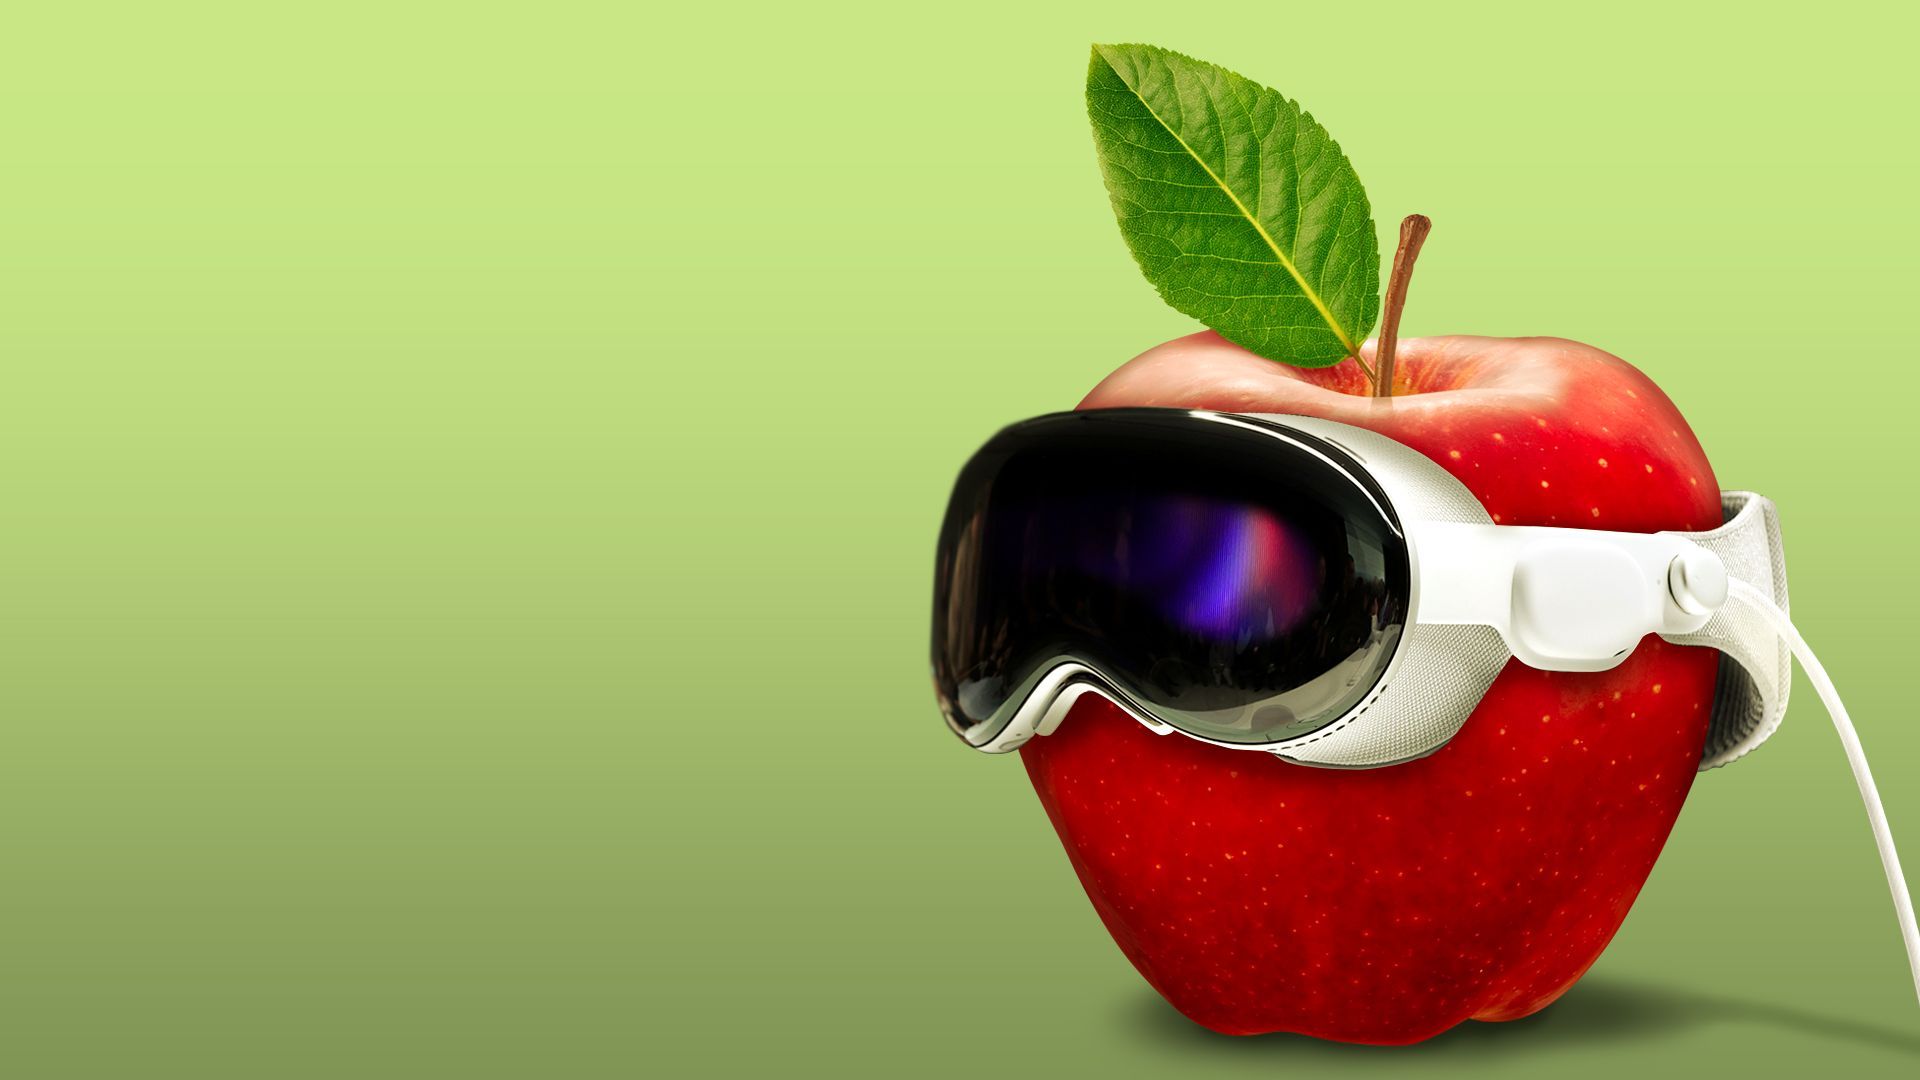 Photo illustration of an apple wearing Apple's Vision Pro headset.